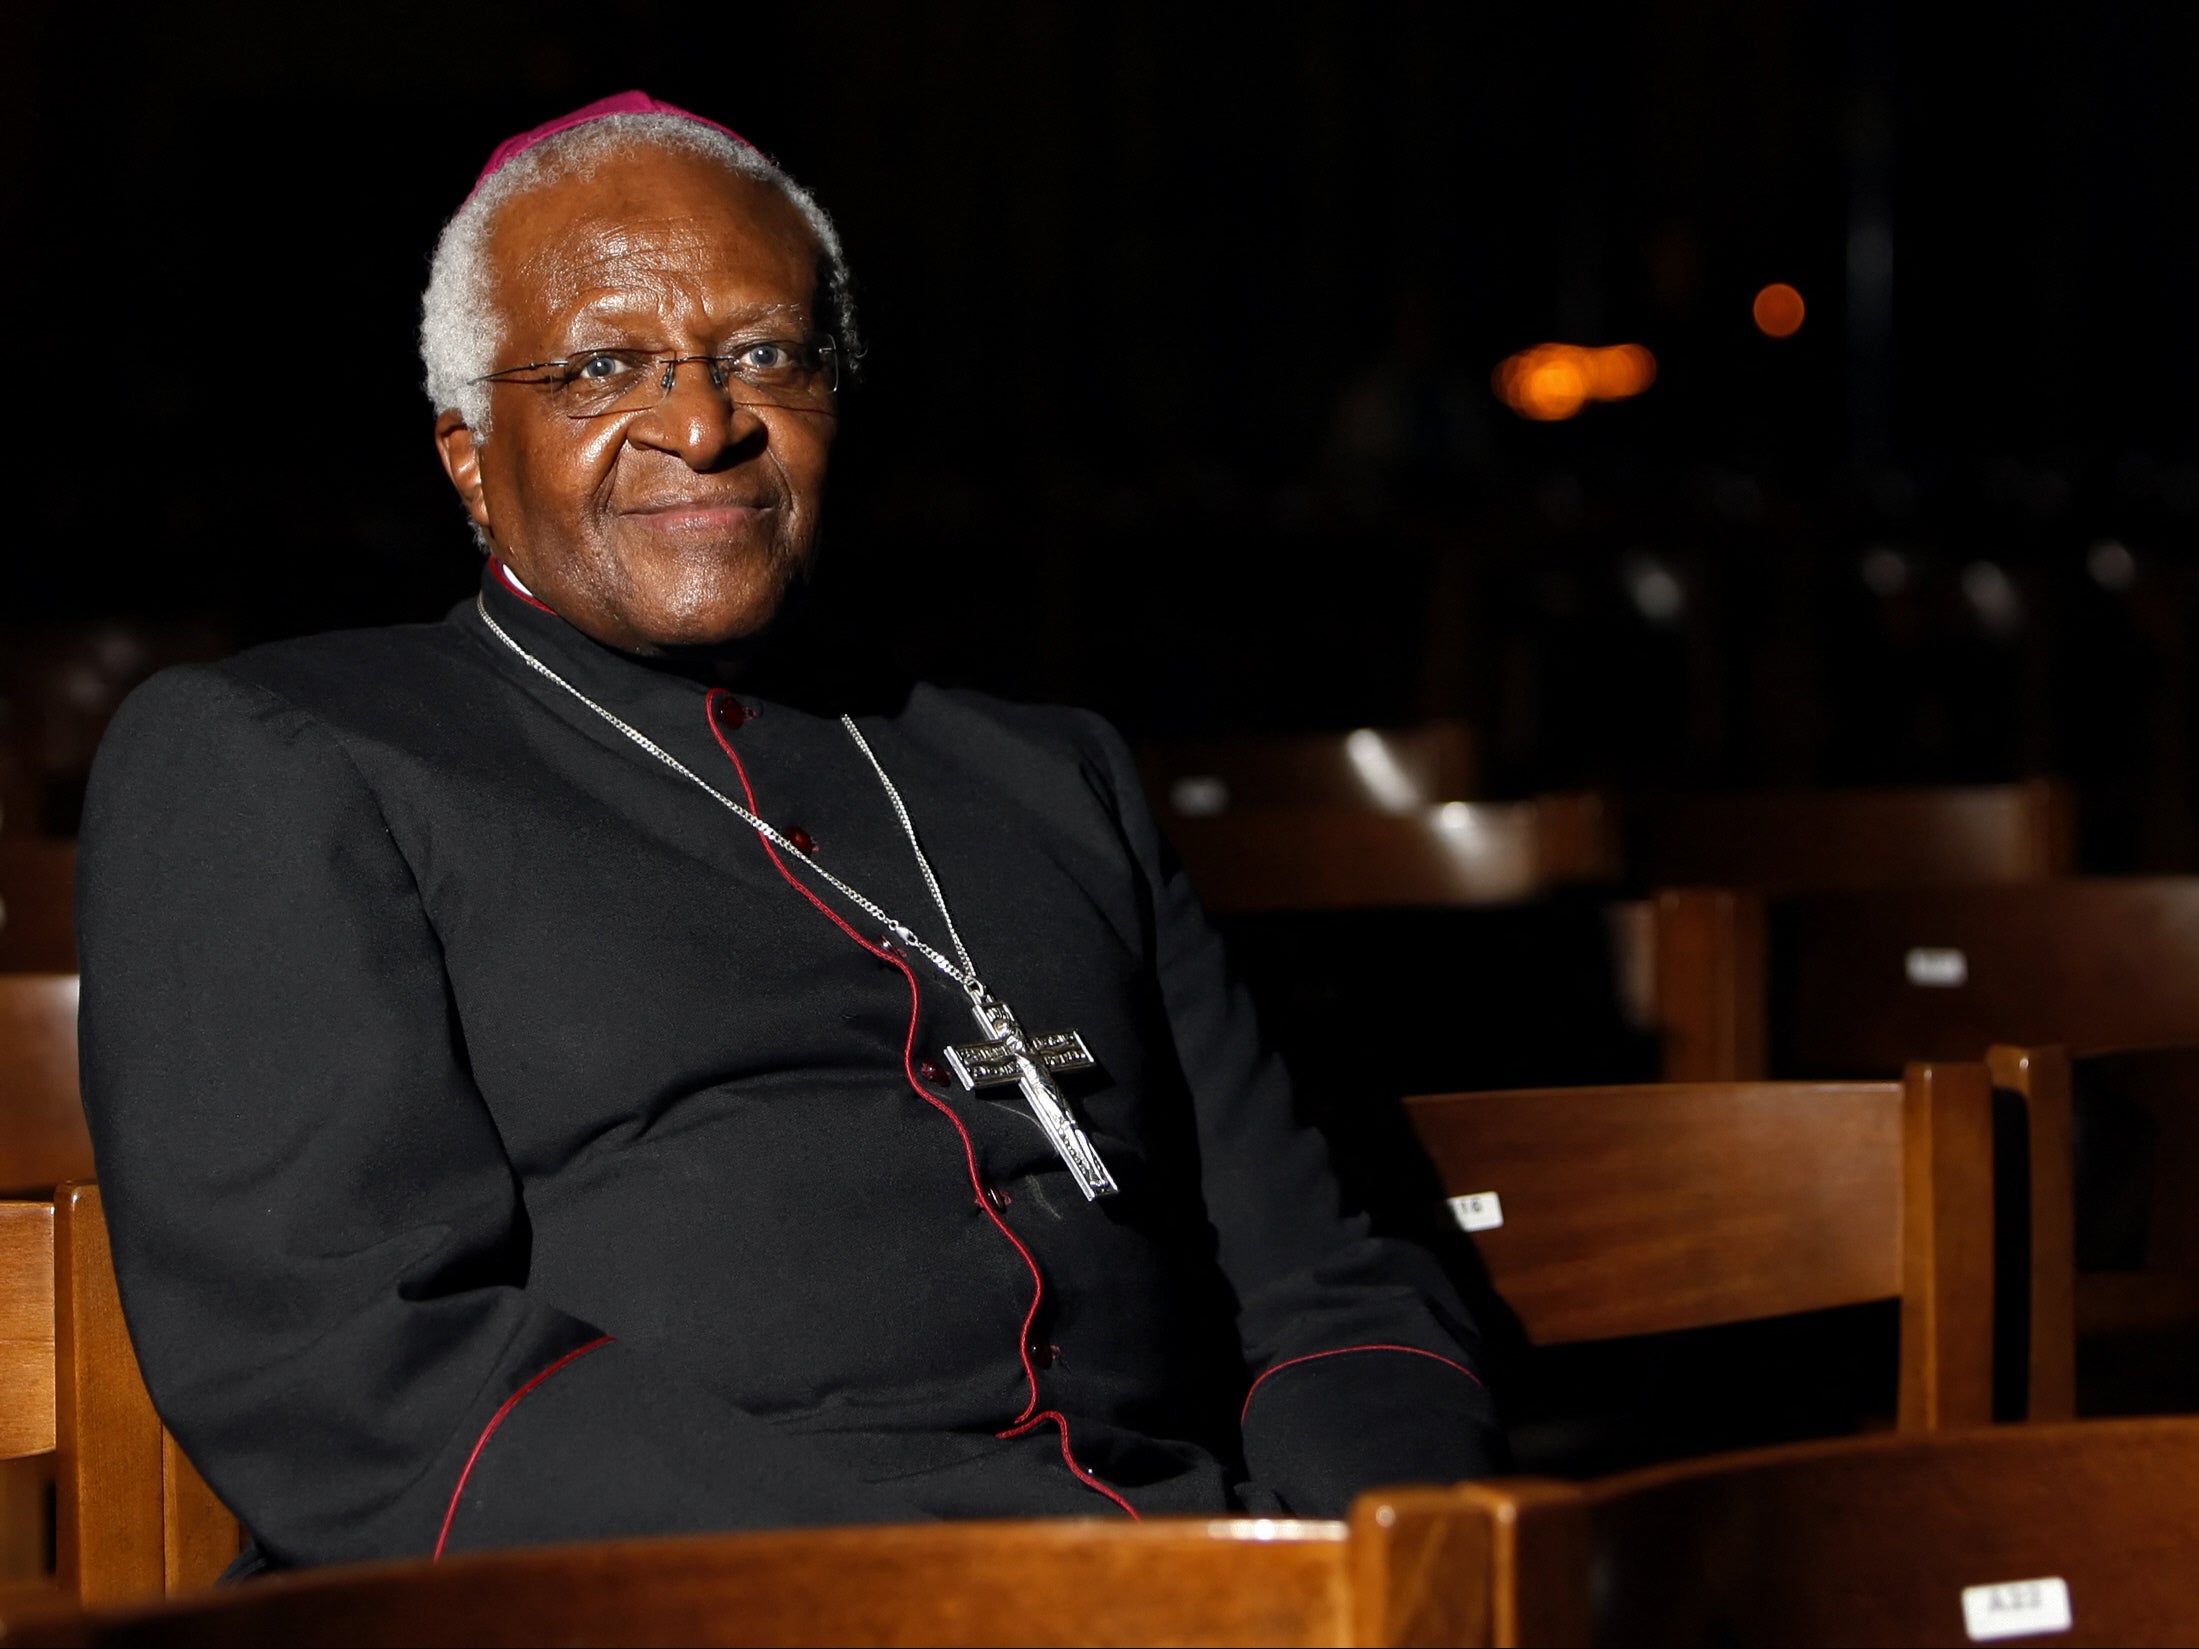 Desmond Tutu following a service to present him with an honorary fellowship of the Guild of Church Musicians in Westminster Cathedral, London, in 2007